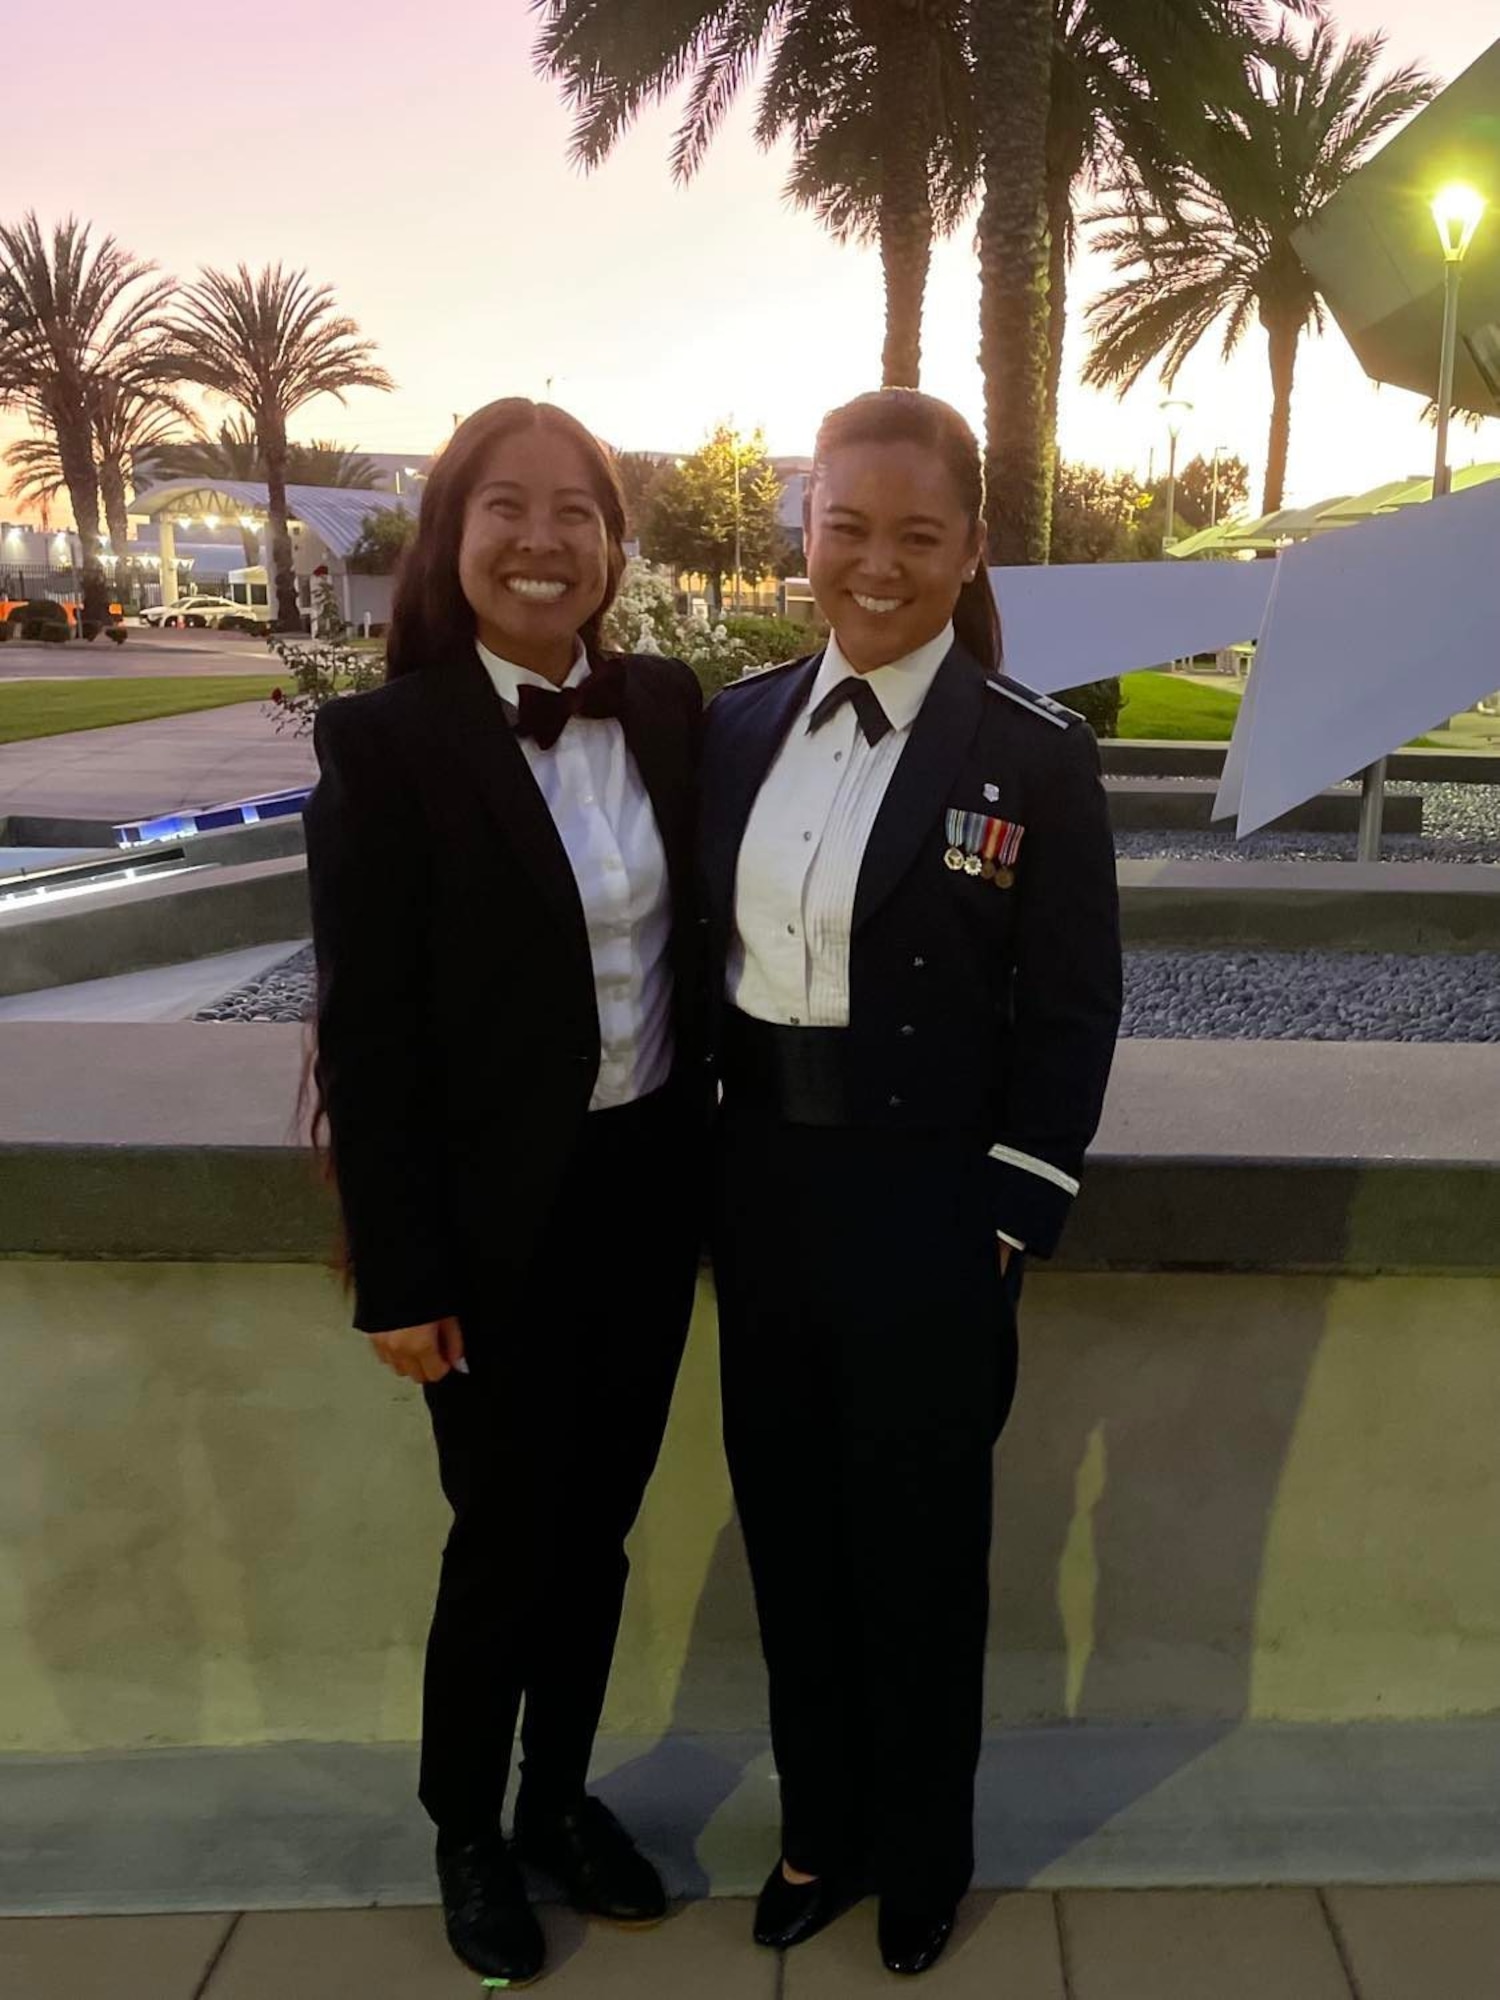 Capt. Joi Renee Athanaxay and her spouse, Lexie Athanaxay pose for a photo in front of the Delta Feature at Los Angeles Air Force Base, Calif.